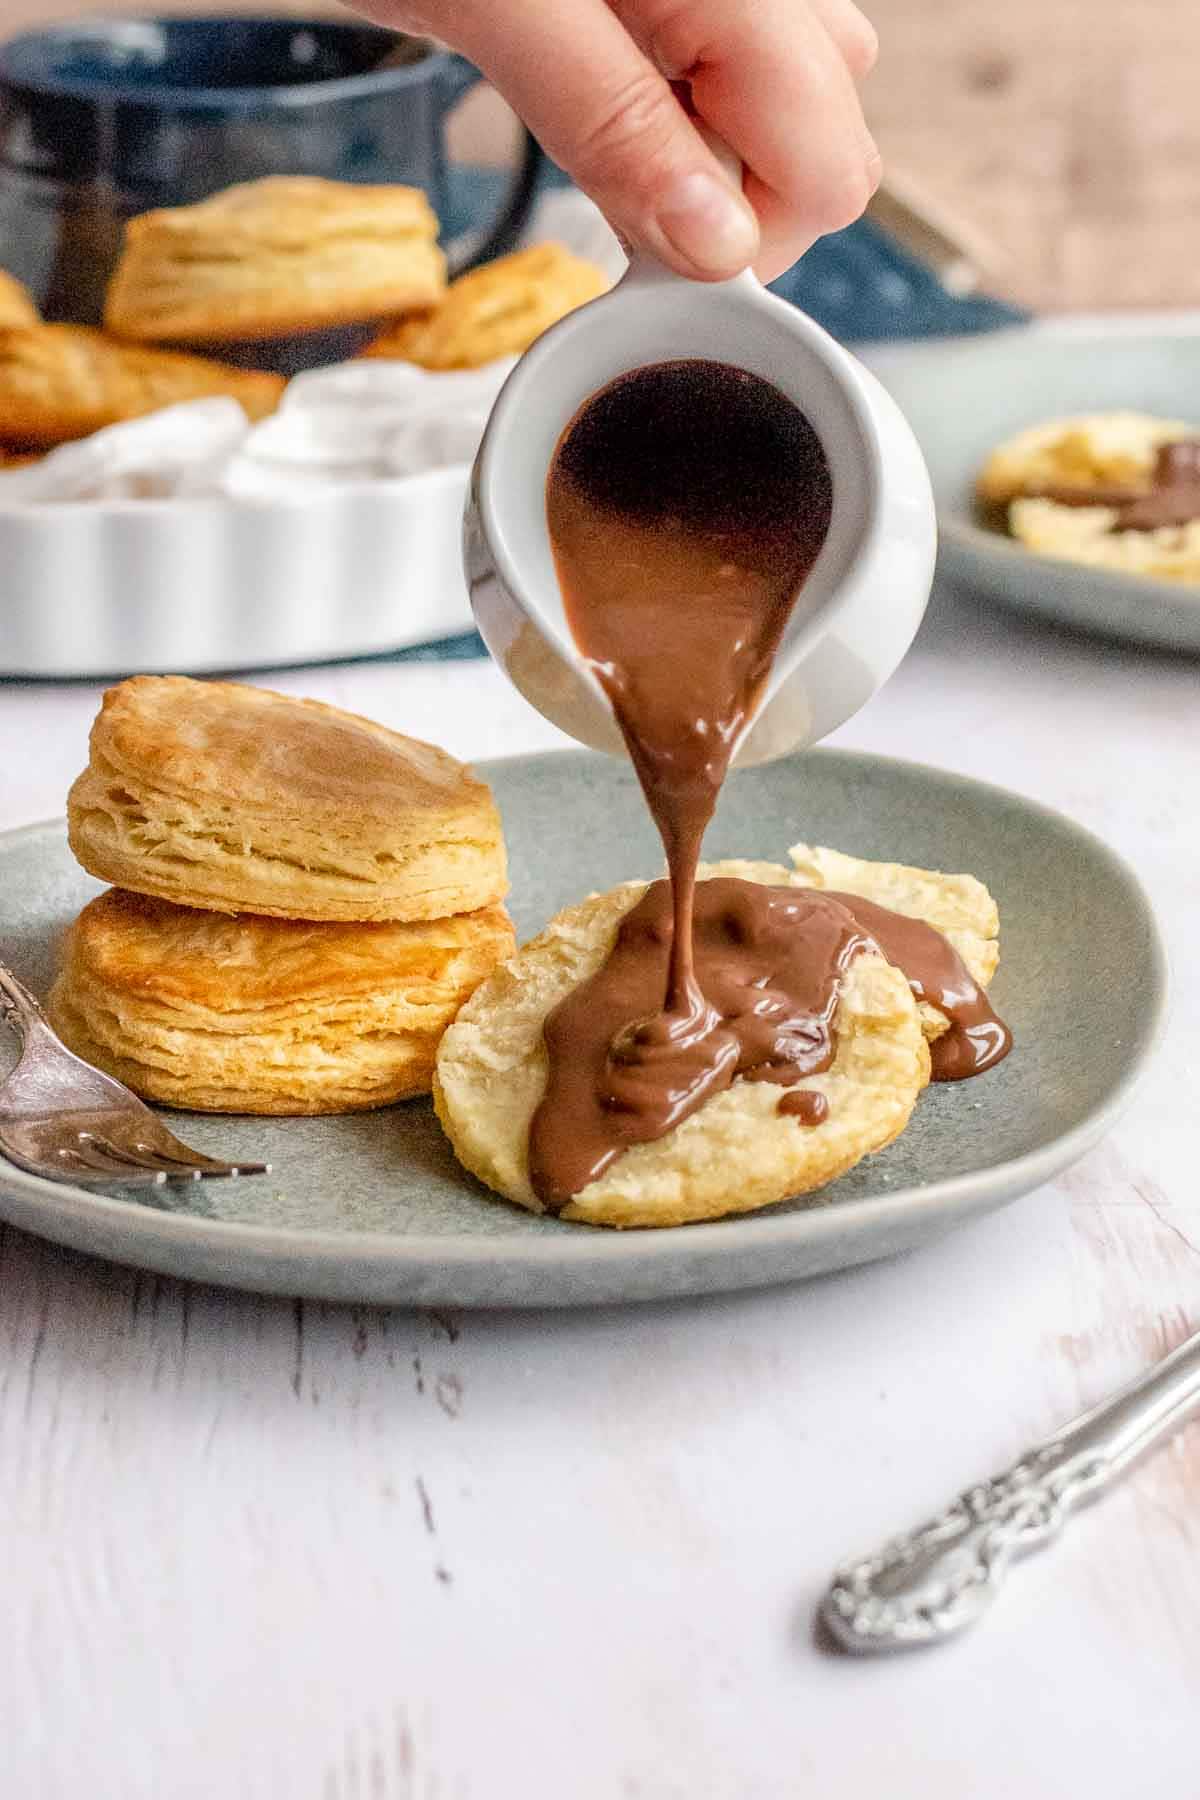 Chocolate gravy being poured over biscuits, on plate.